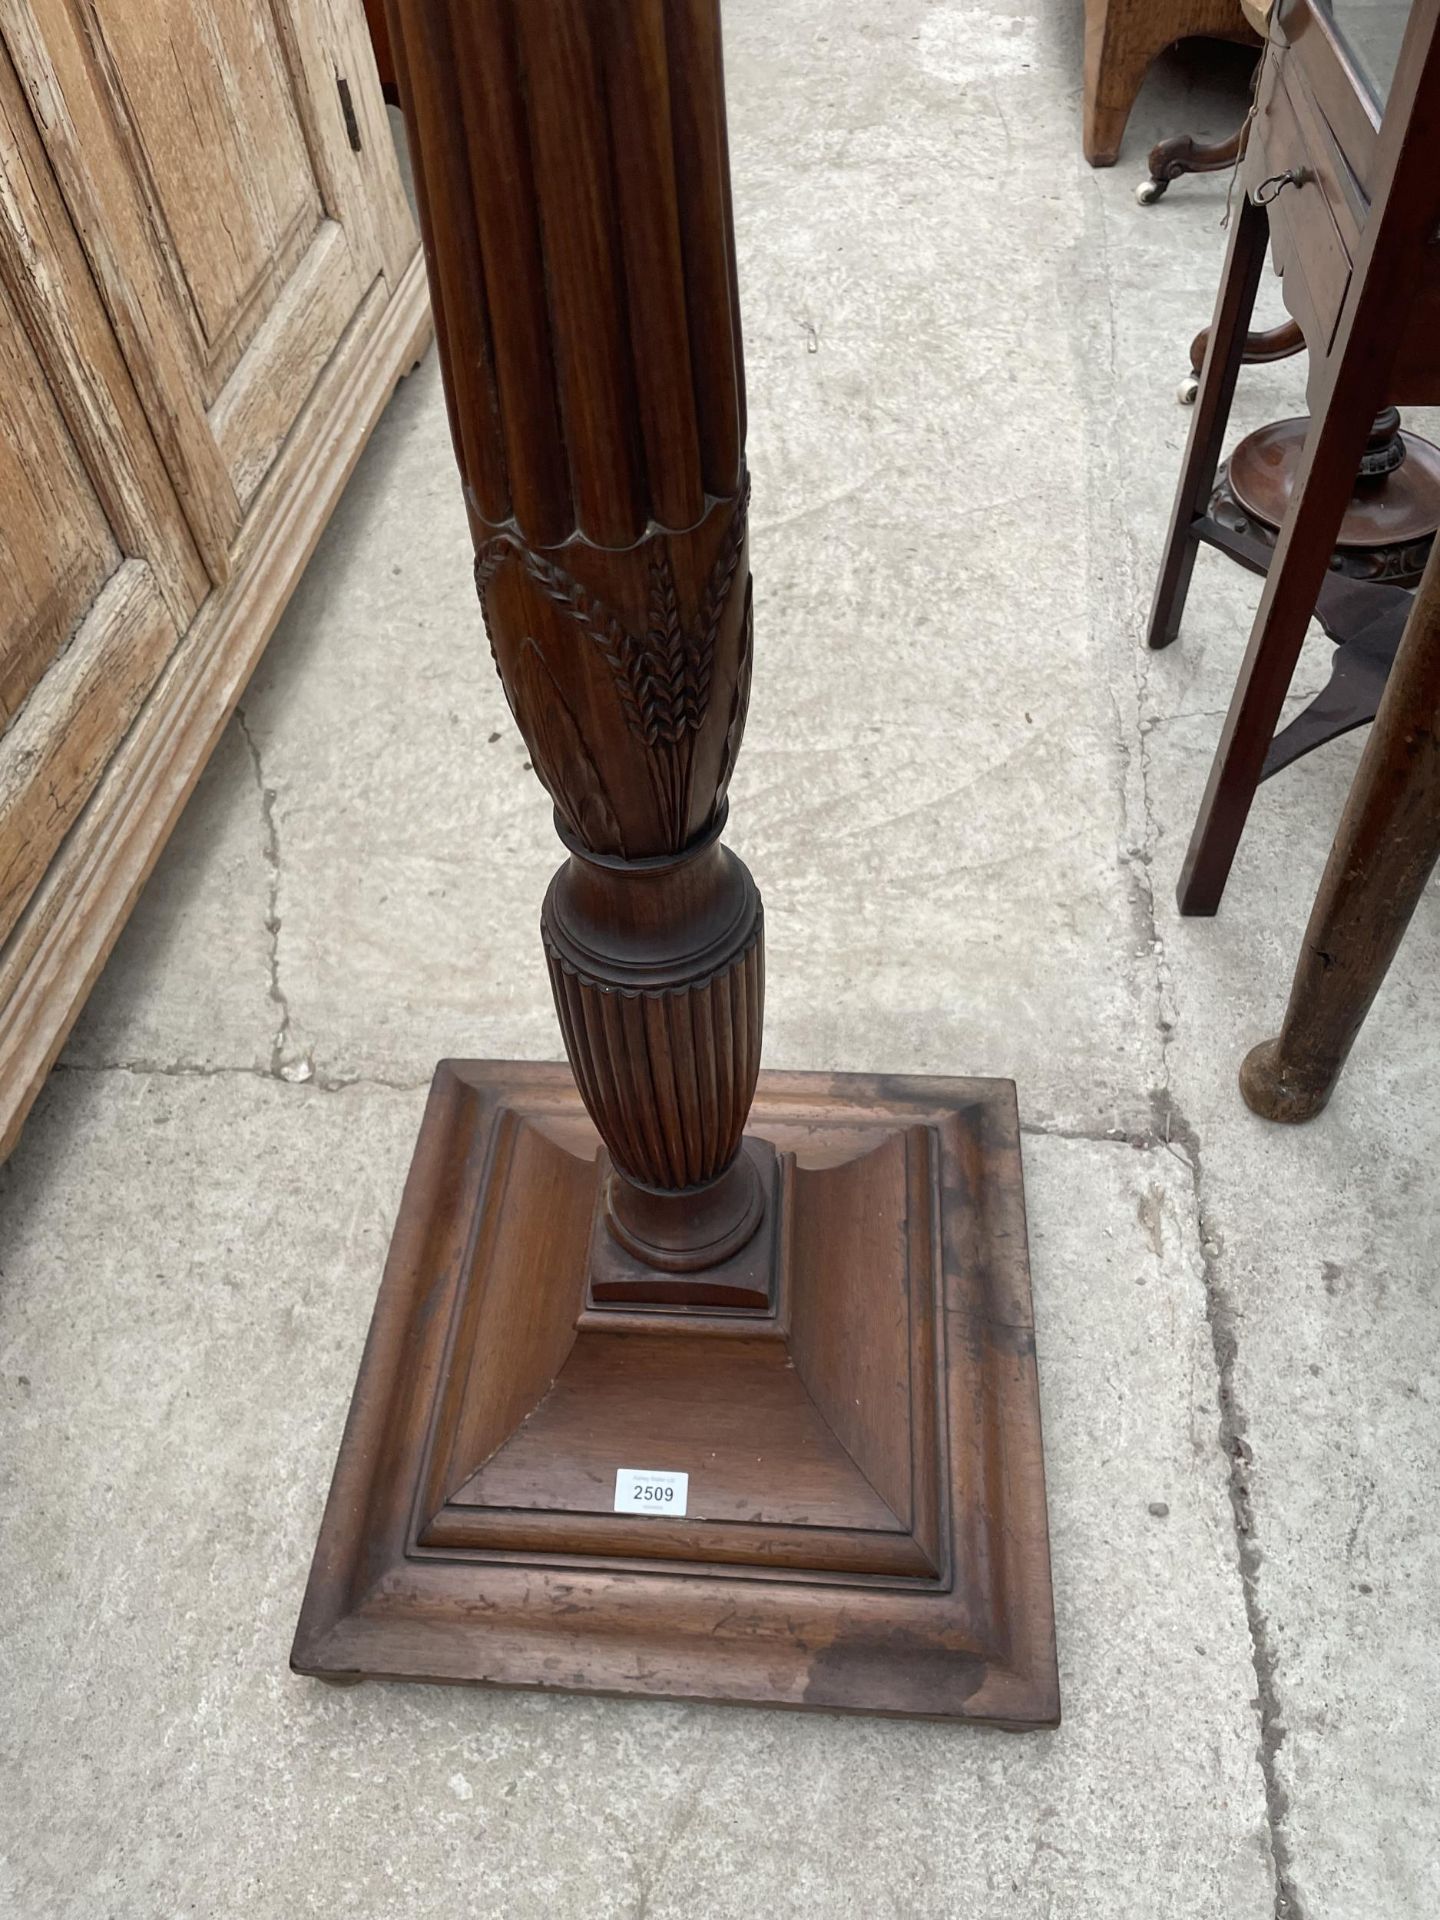 AN EARLY 20TH CENTURY MAHOGANY STANDARD LAMP ON STEPPED BASE WITH TURNED AND FLUTED COLUMN - Image 3 of 3